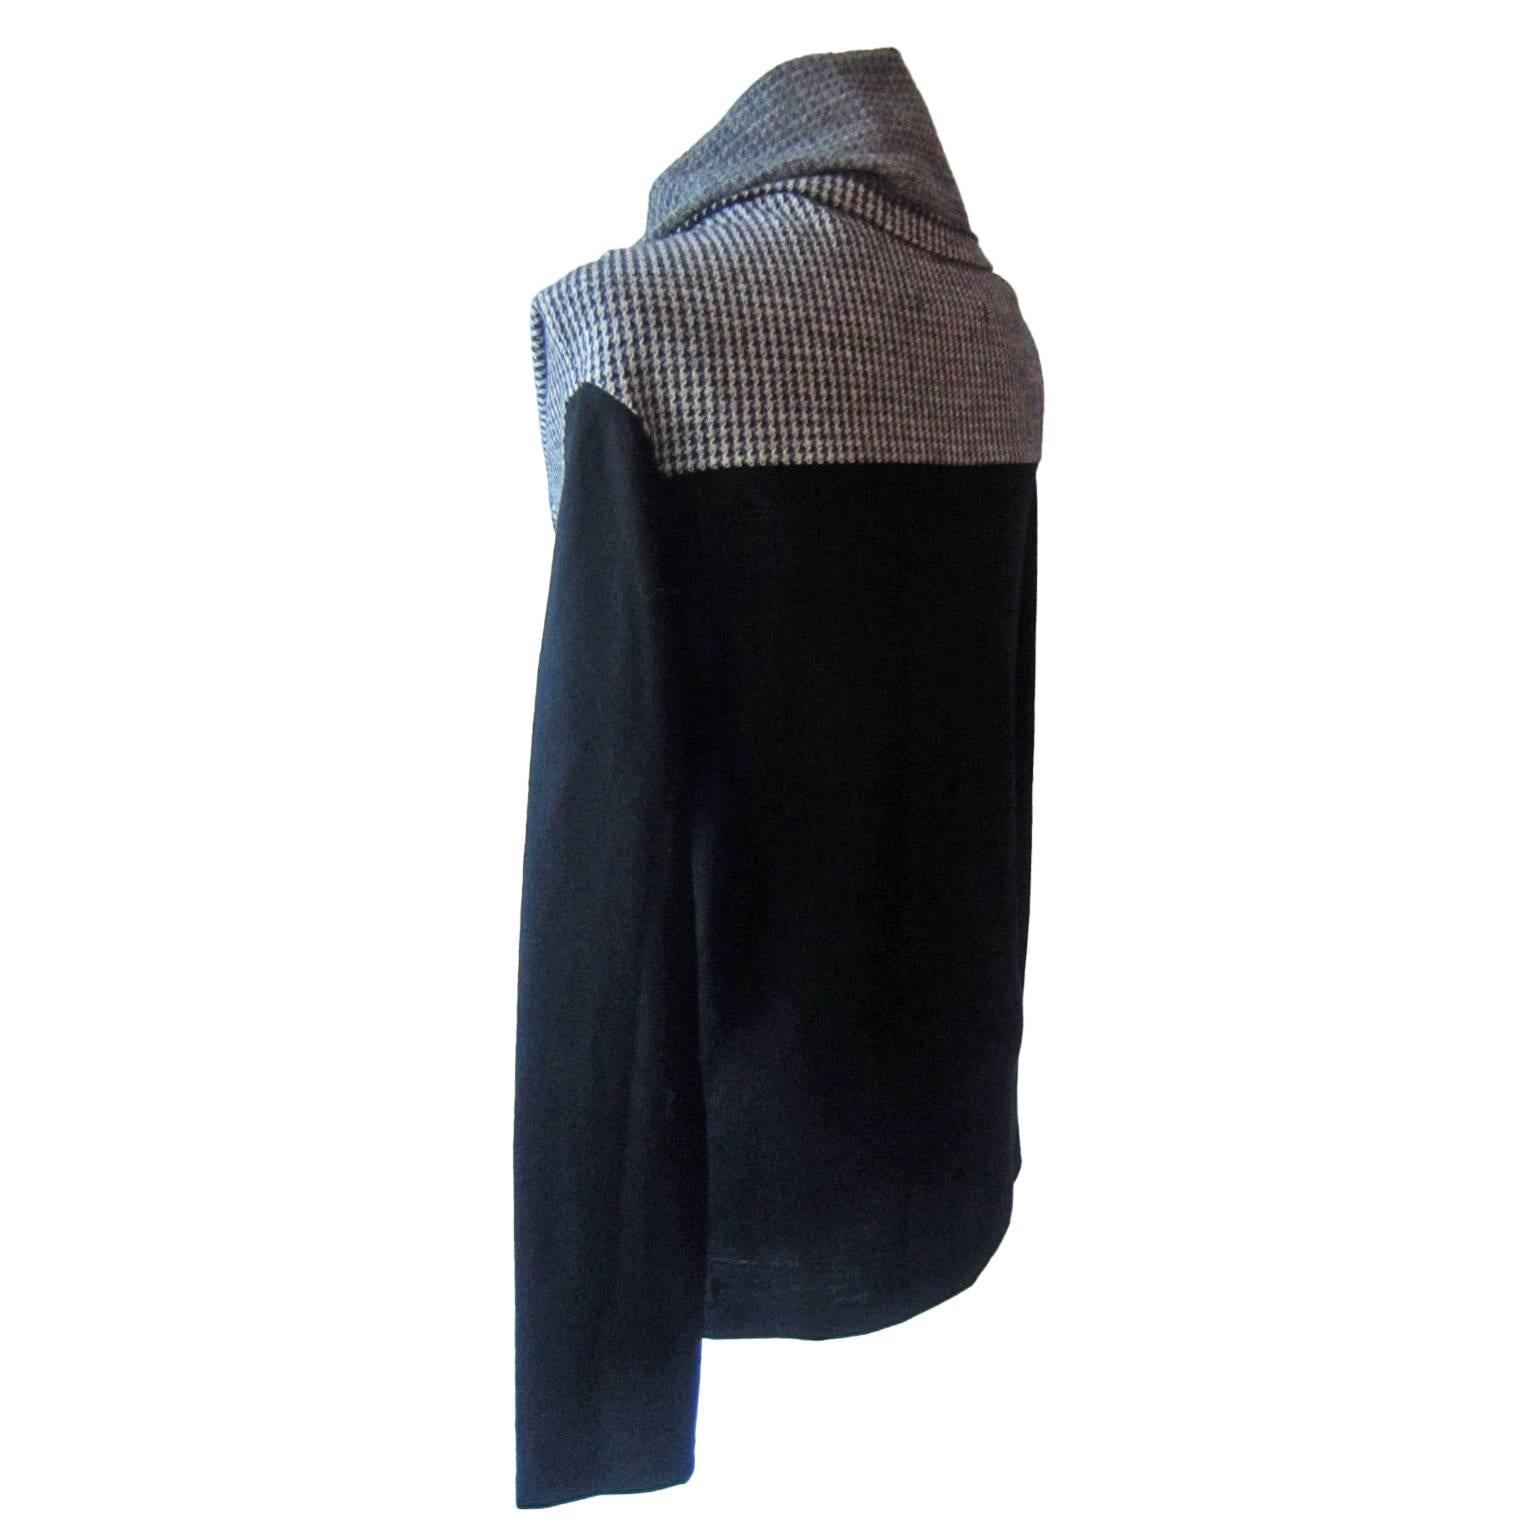 A black turtleneck jumper by Yohji Yamamoto. The jumper is produced in thin wool. It has a loose, fold down turtleneck in light cream and black contrast Pied De Poule pattern fabric. The fabric is soft, and will fall nicely on the